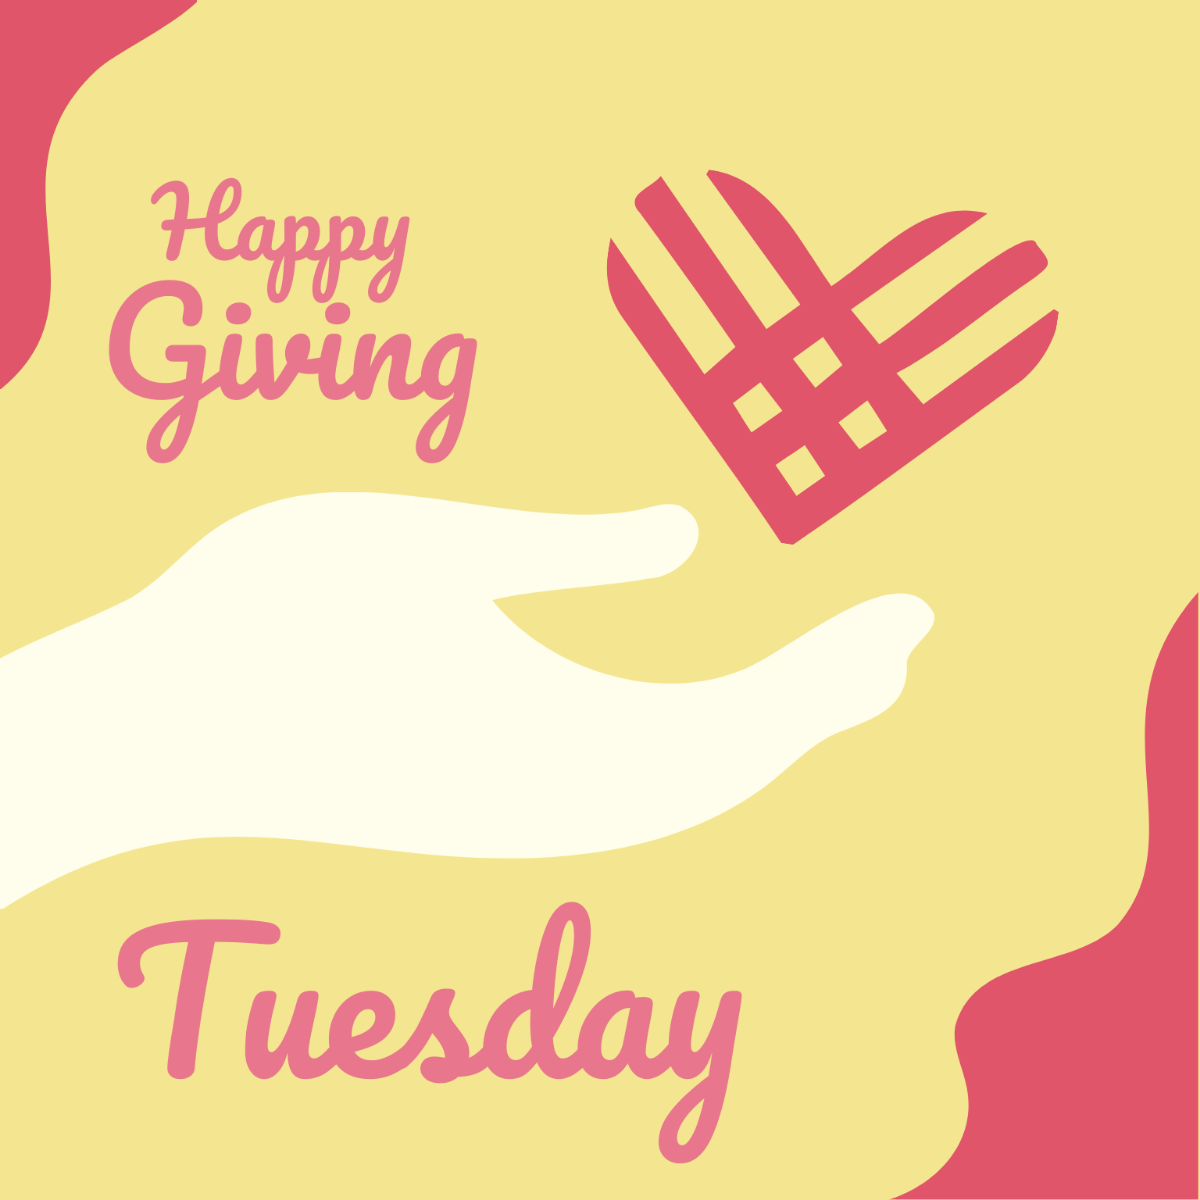 Free Happy Giving Tuesday Vector Template